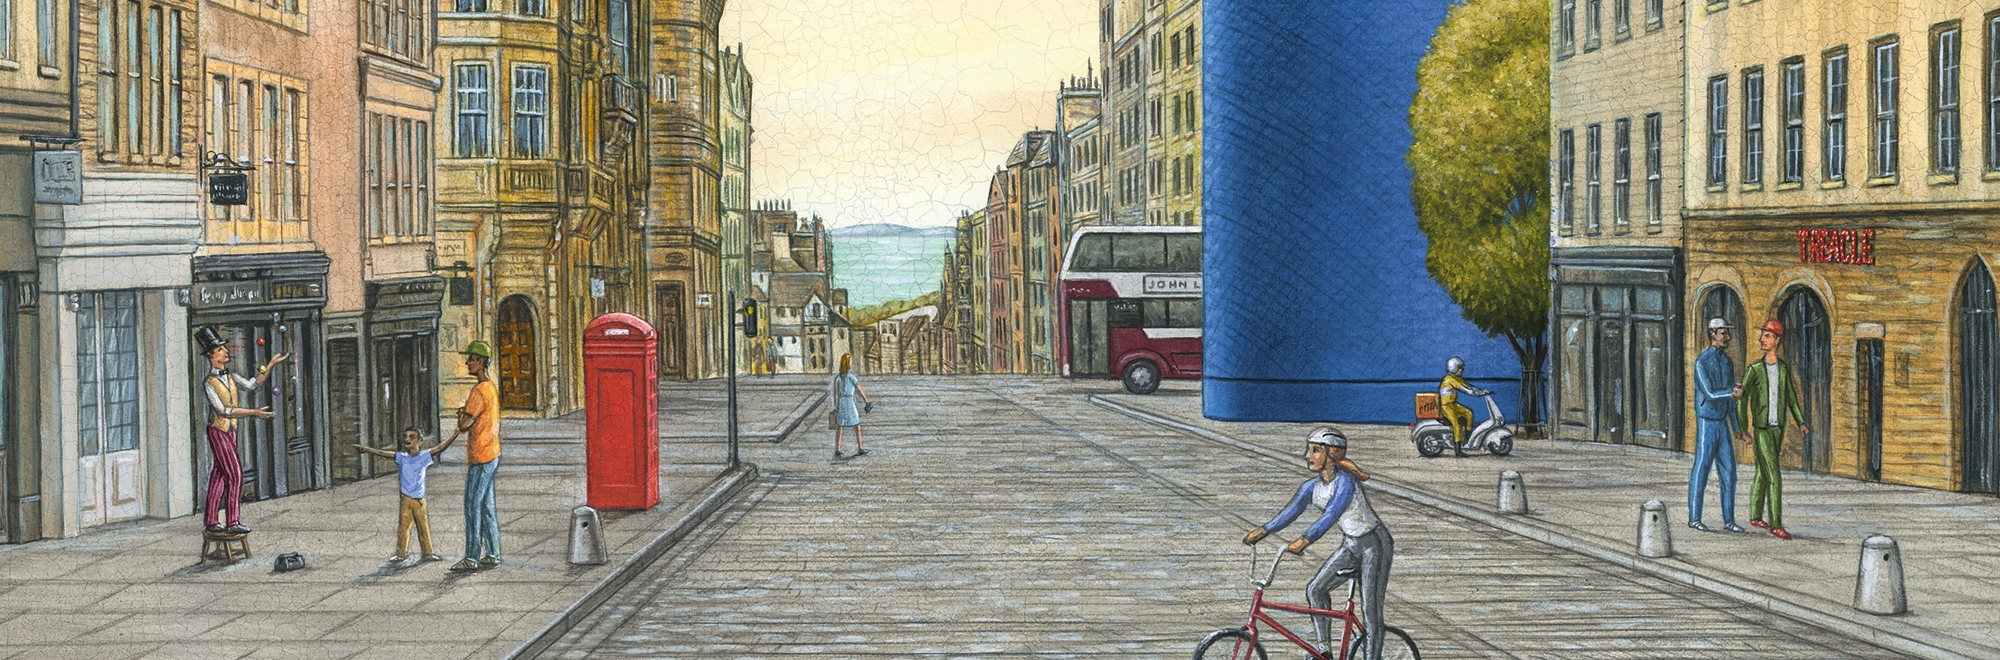 Edinburgh's landmarks are reimagined with products from John Lewis in new poster campaign